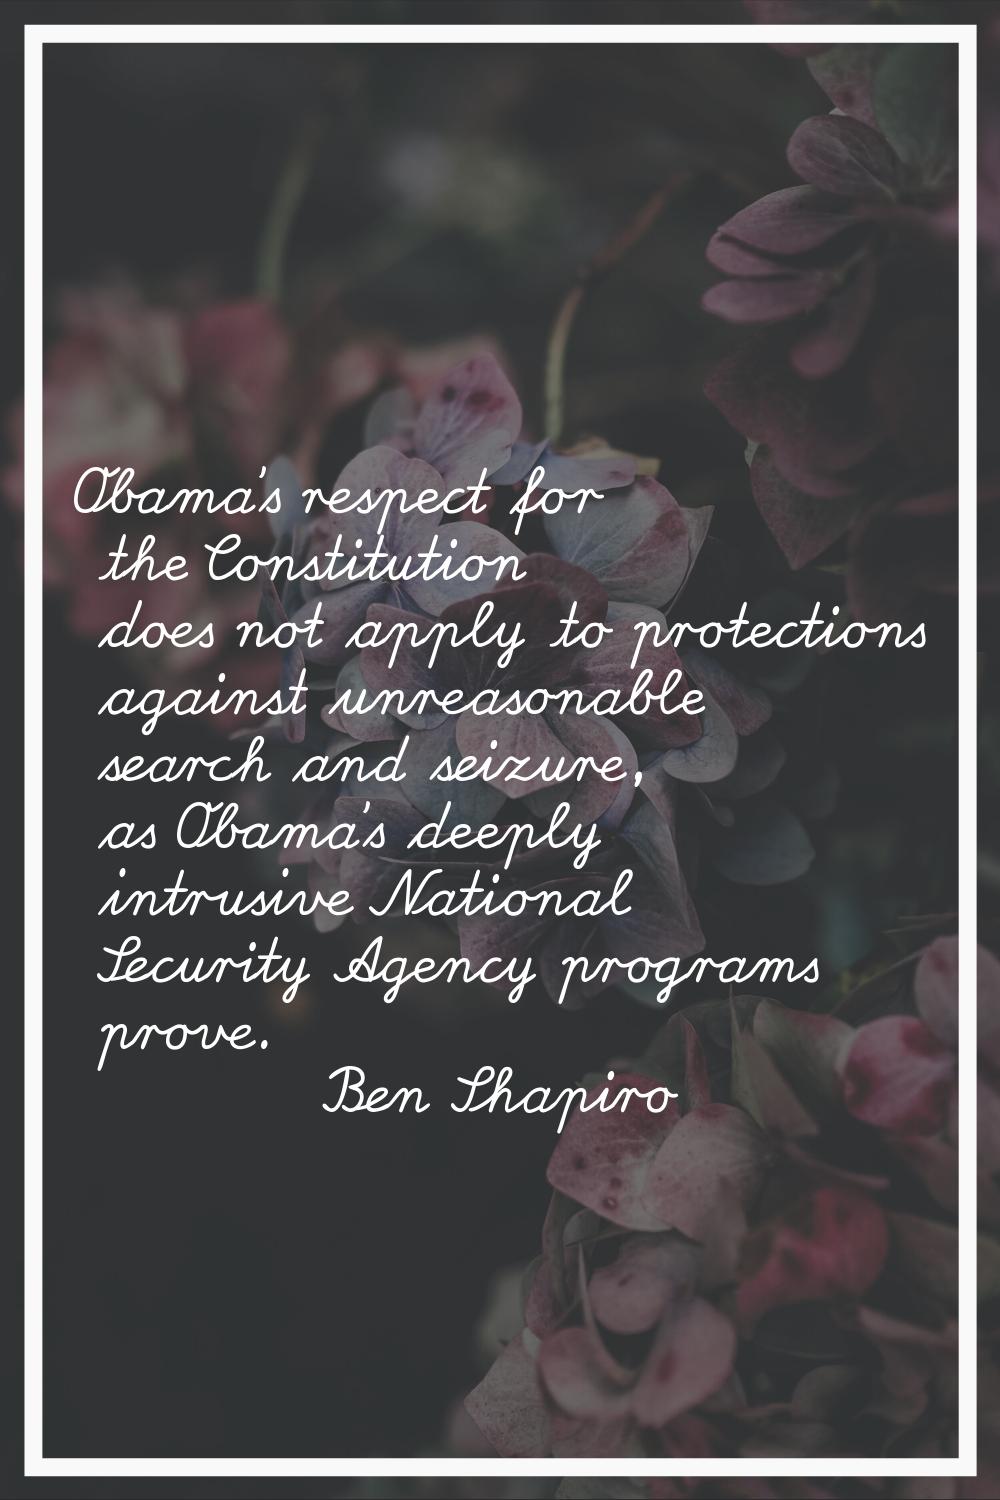 Obama's respect for the Constitution does not apply to protections against unreasonable search and 